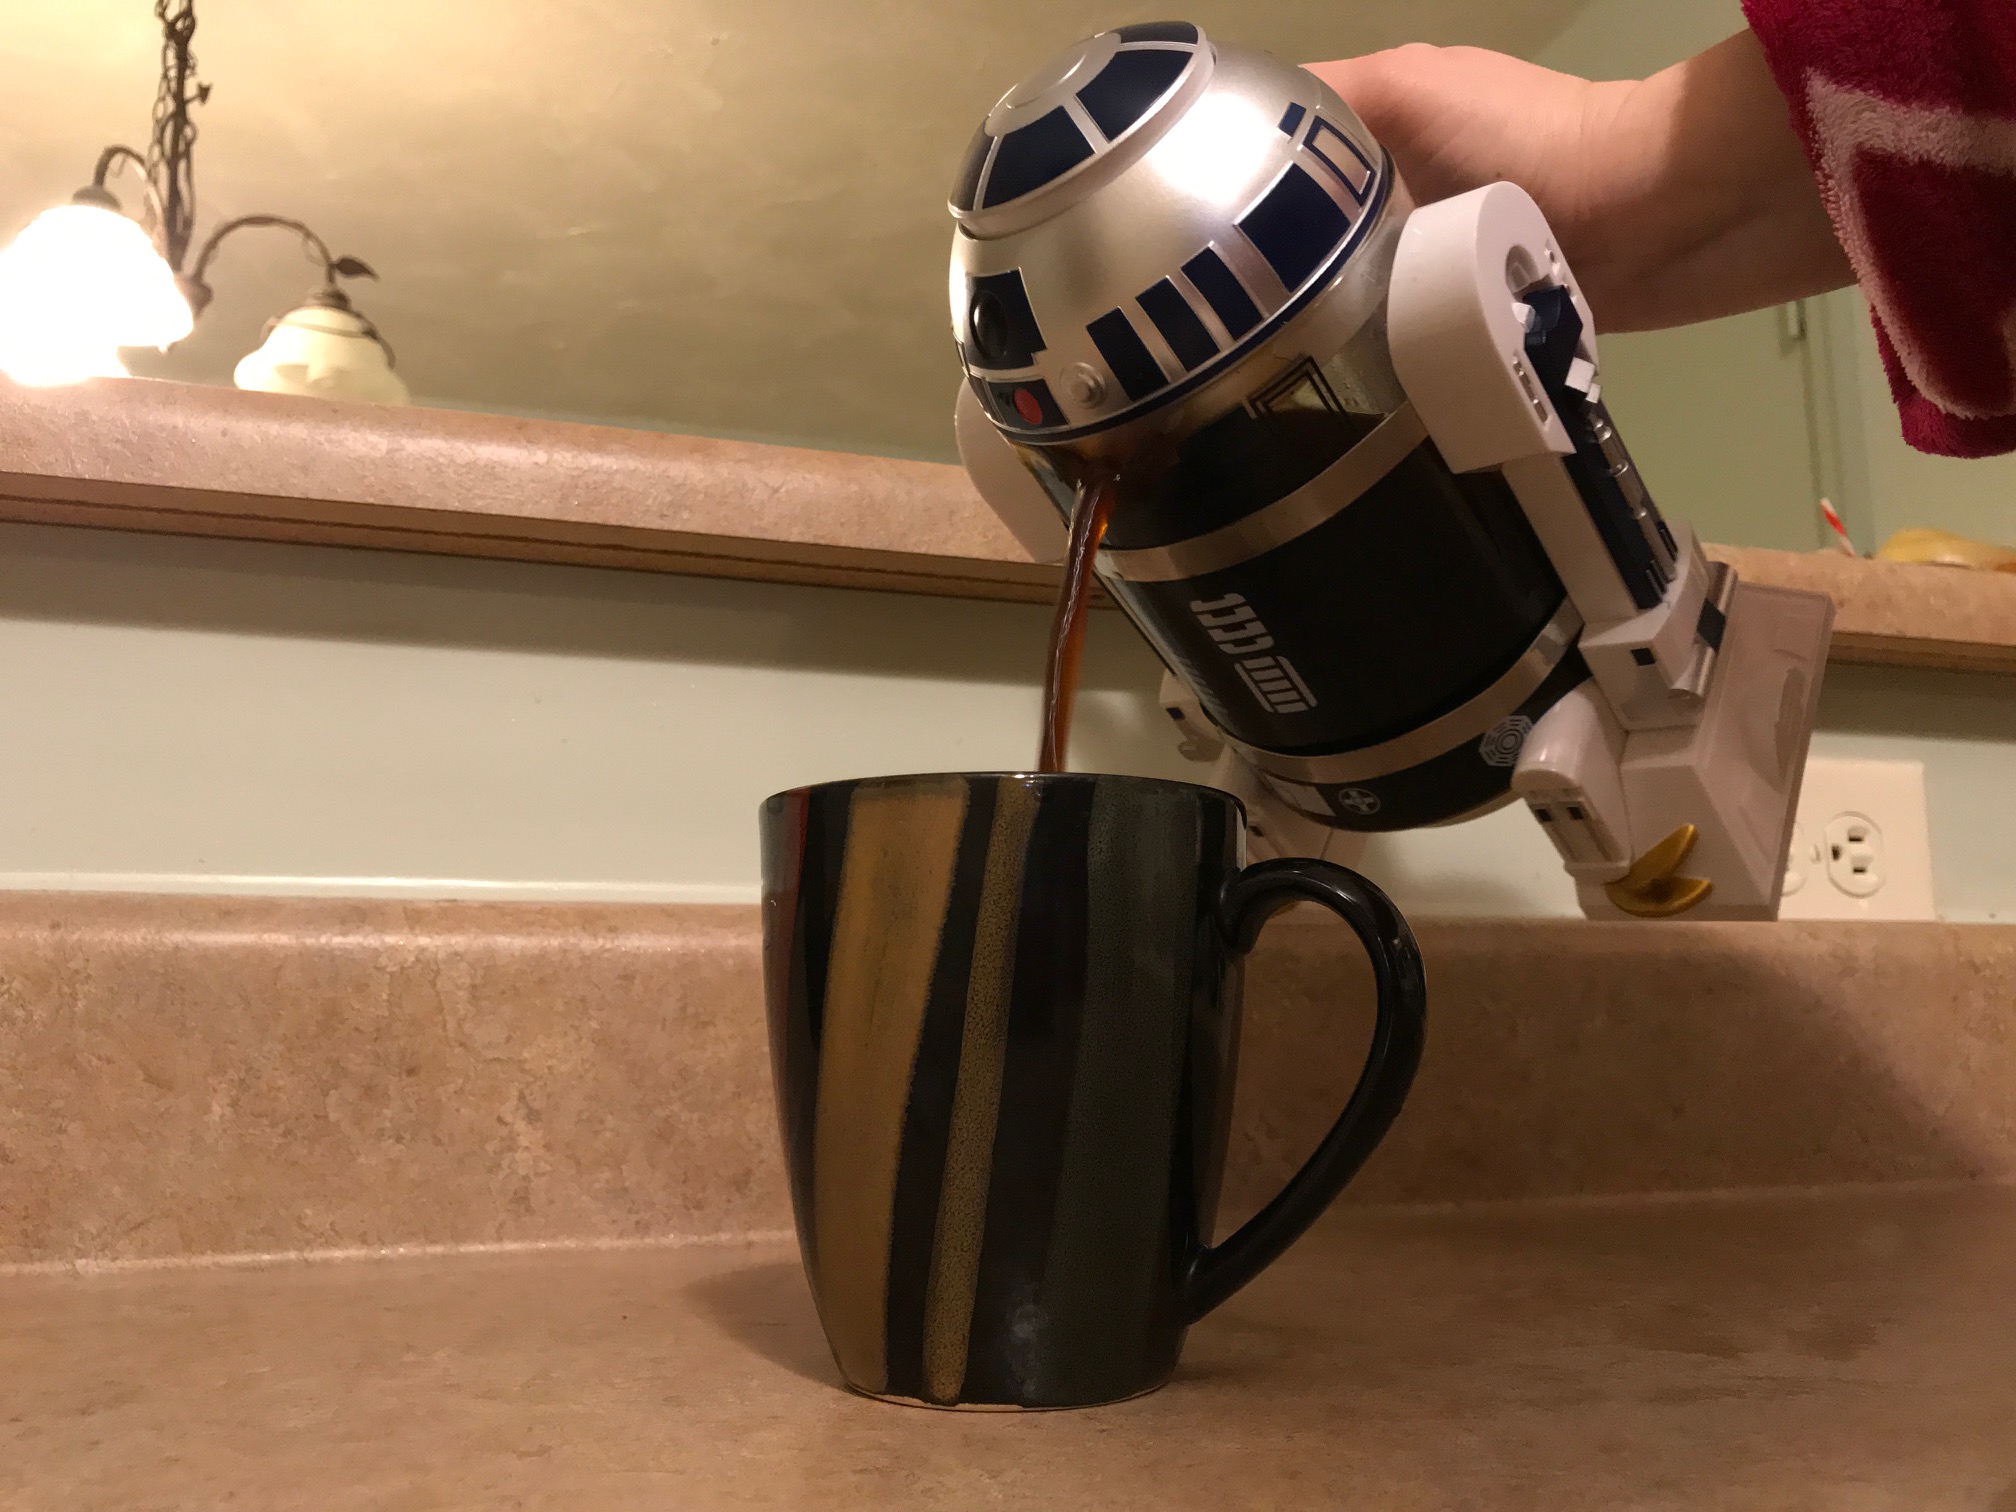 The Best Part of Waking Up? This Star Wars Coffee Machine